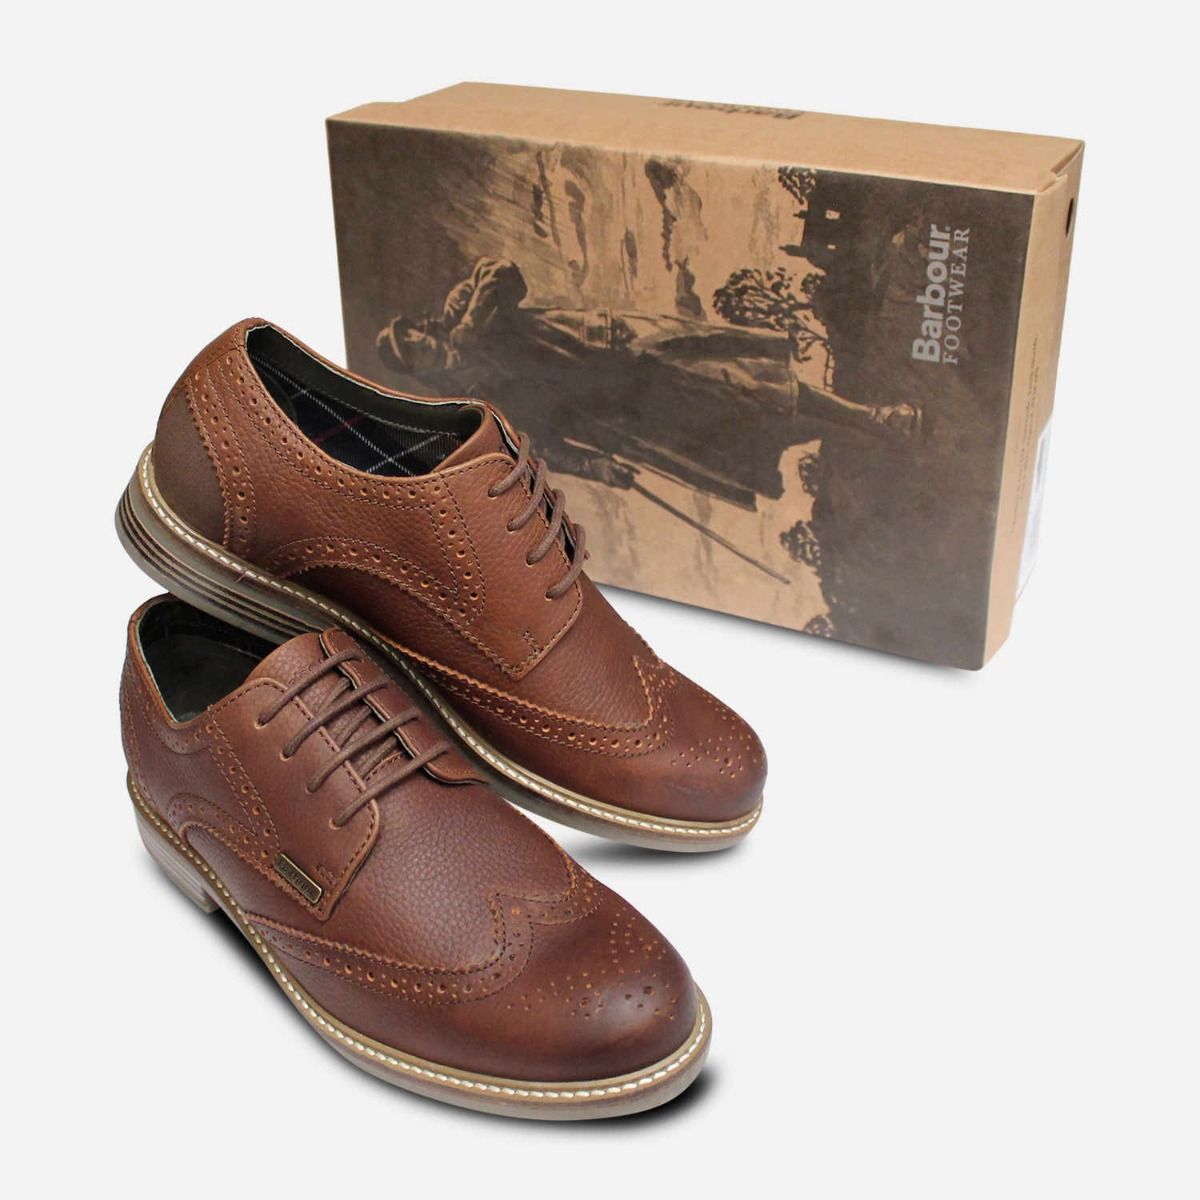 Barbour Derby Lace Up Brogue Shoes in 